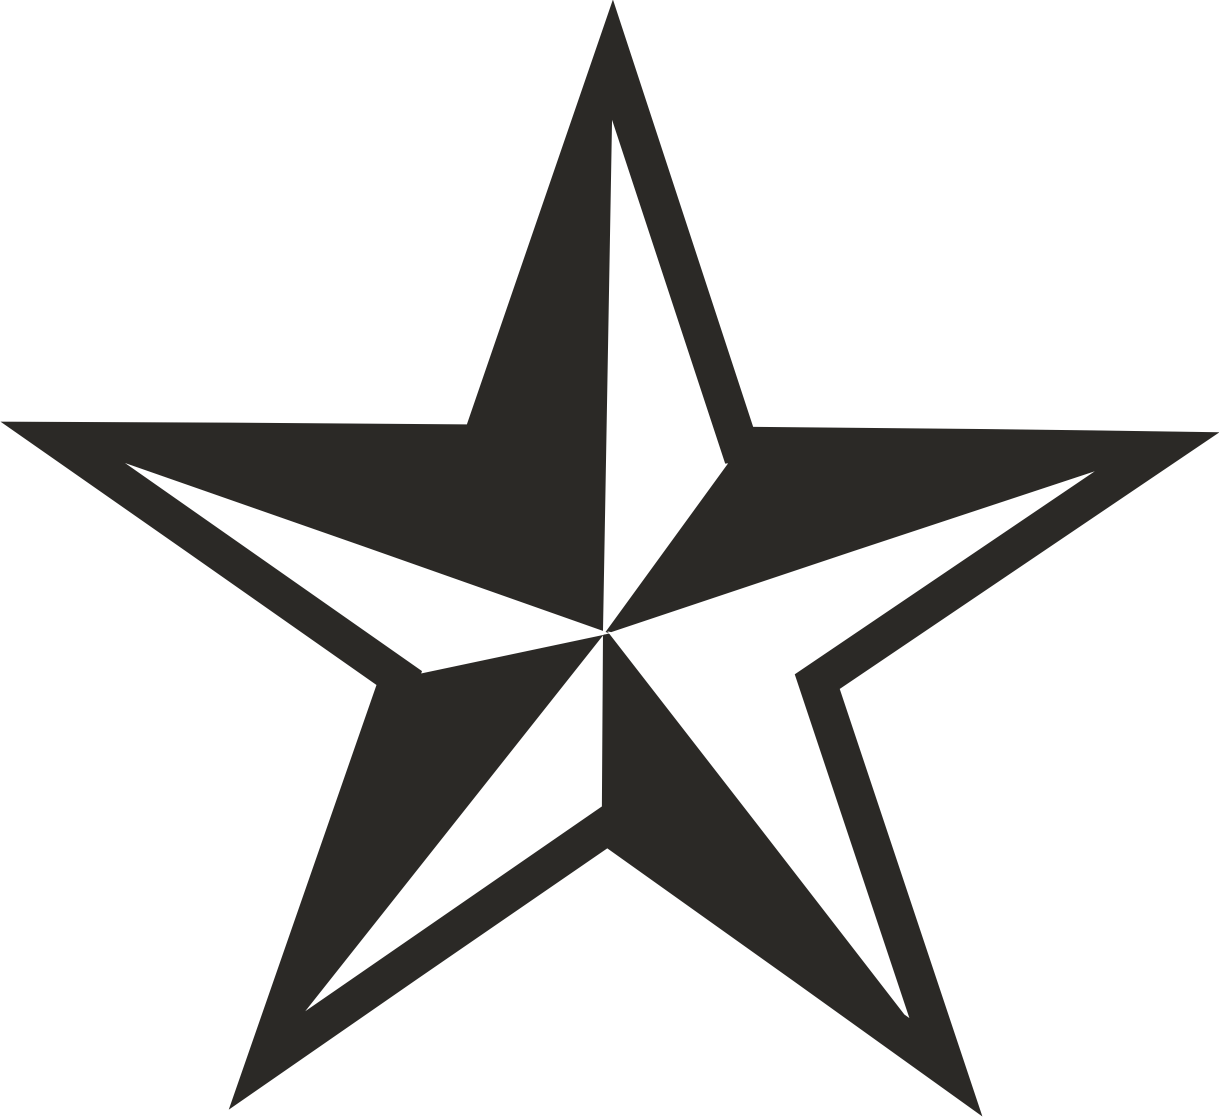 Star black and white small black star clip art clipart free to use ...